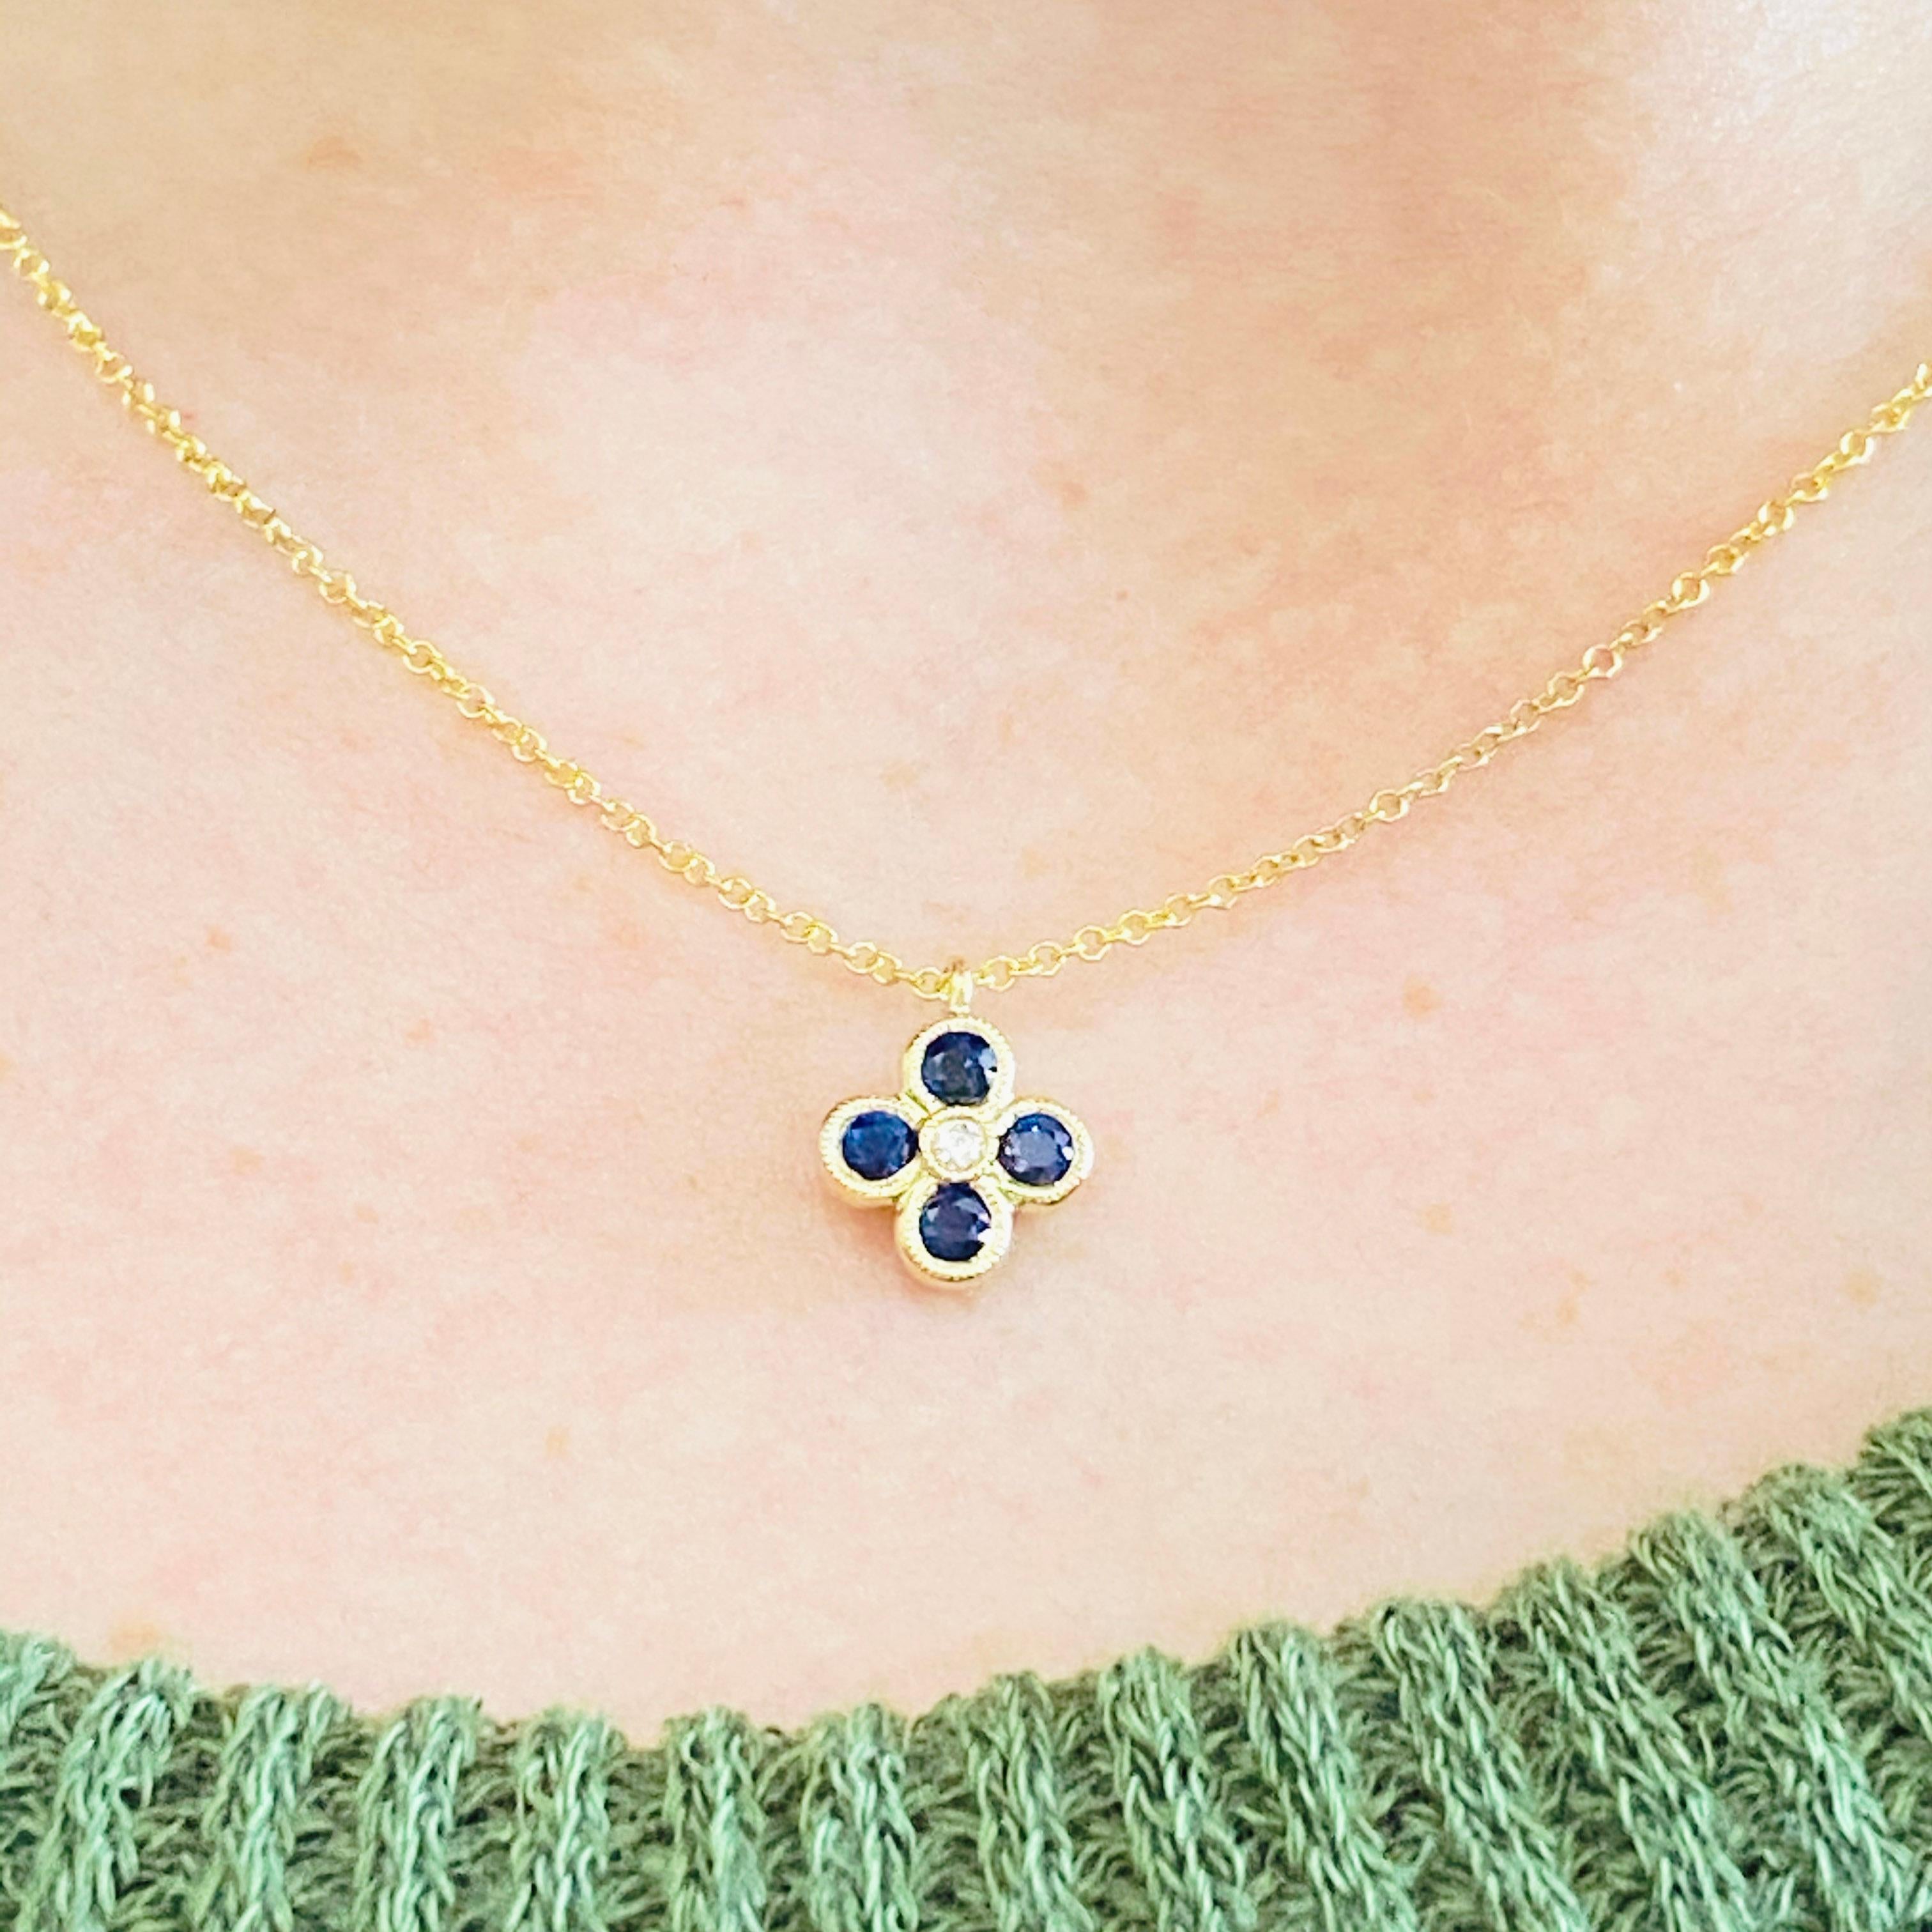 This Gabriel & Co. pendant is stunningly beautiful and has a blue sapphire quartet set in polished 14k yellow gold encircling a bright diamond is very modern yet classic! This necklace is classy enough to pair easily with formal wear, yet is very